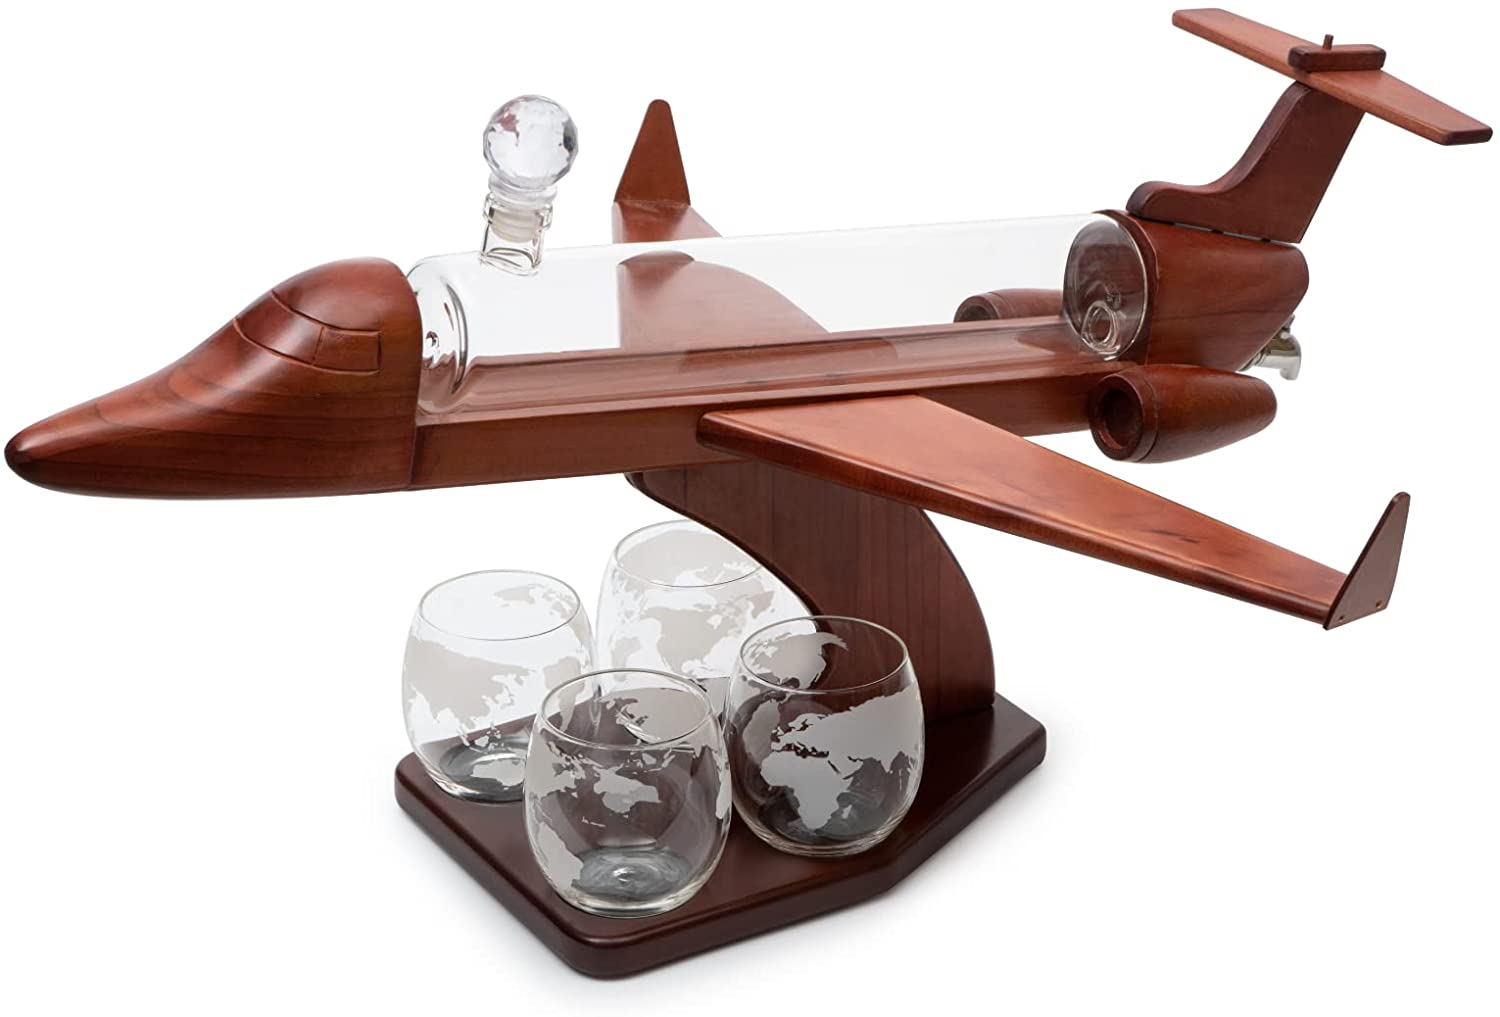 Buy Amosfun Plane Gifts Creative Bottle Openers Alloy Airplane Shaped Cap  Lifters Airplane Model Souvenirs Vintage Jar Openers Wedding Party Supplies  3Pcs Airplane Gift Online at Low Prices in India - Amazon.in